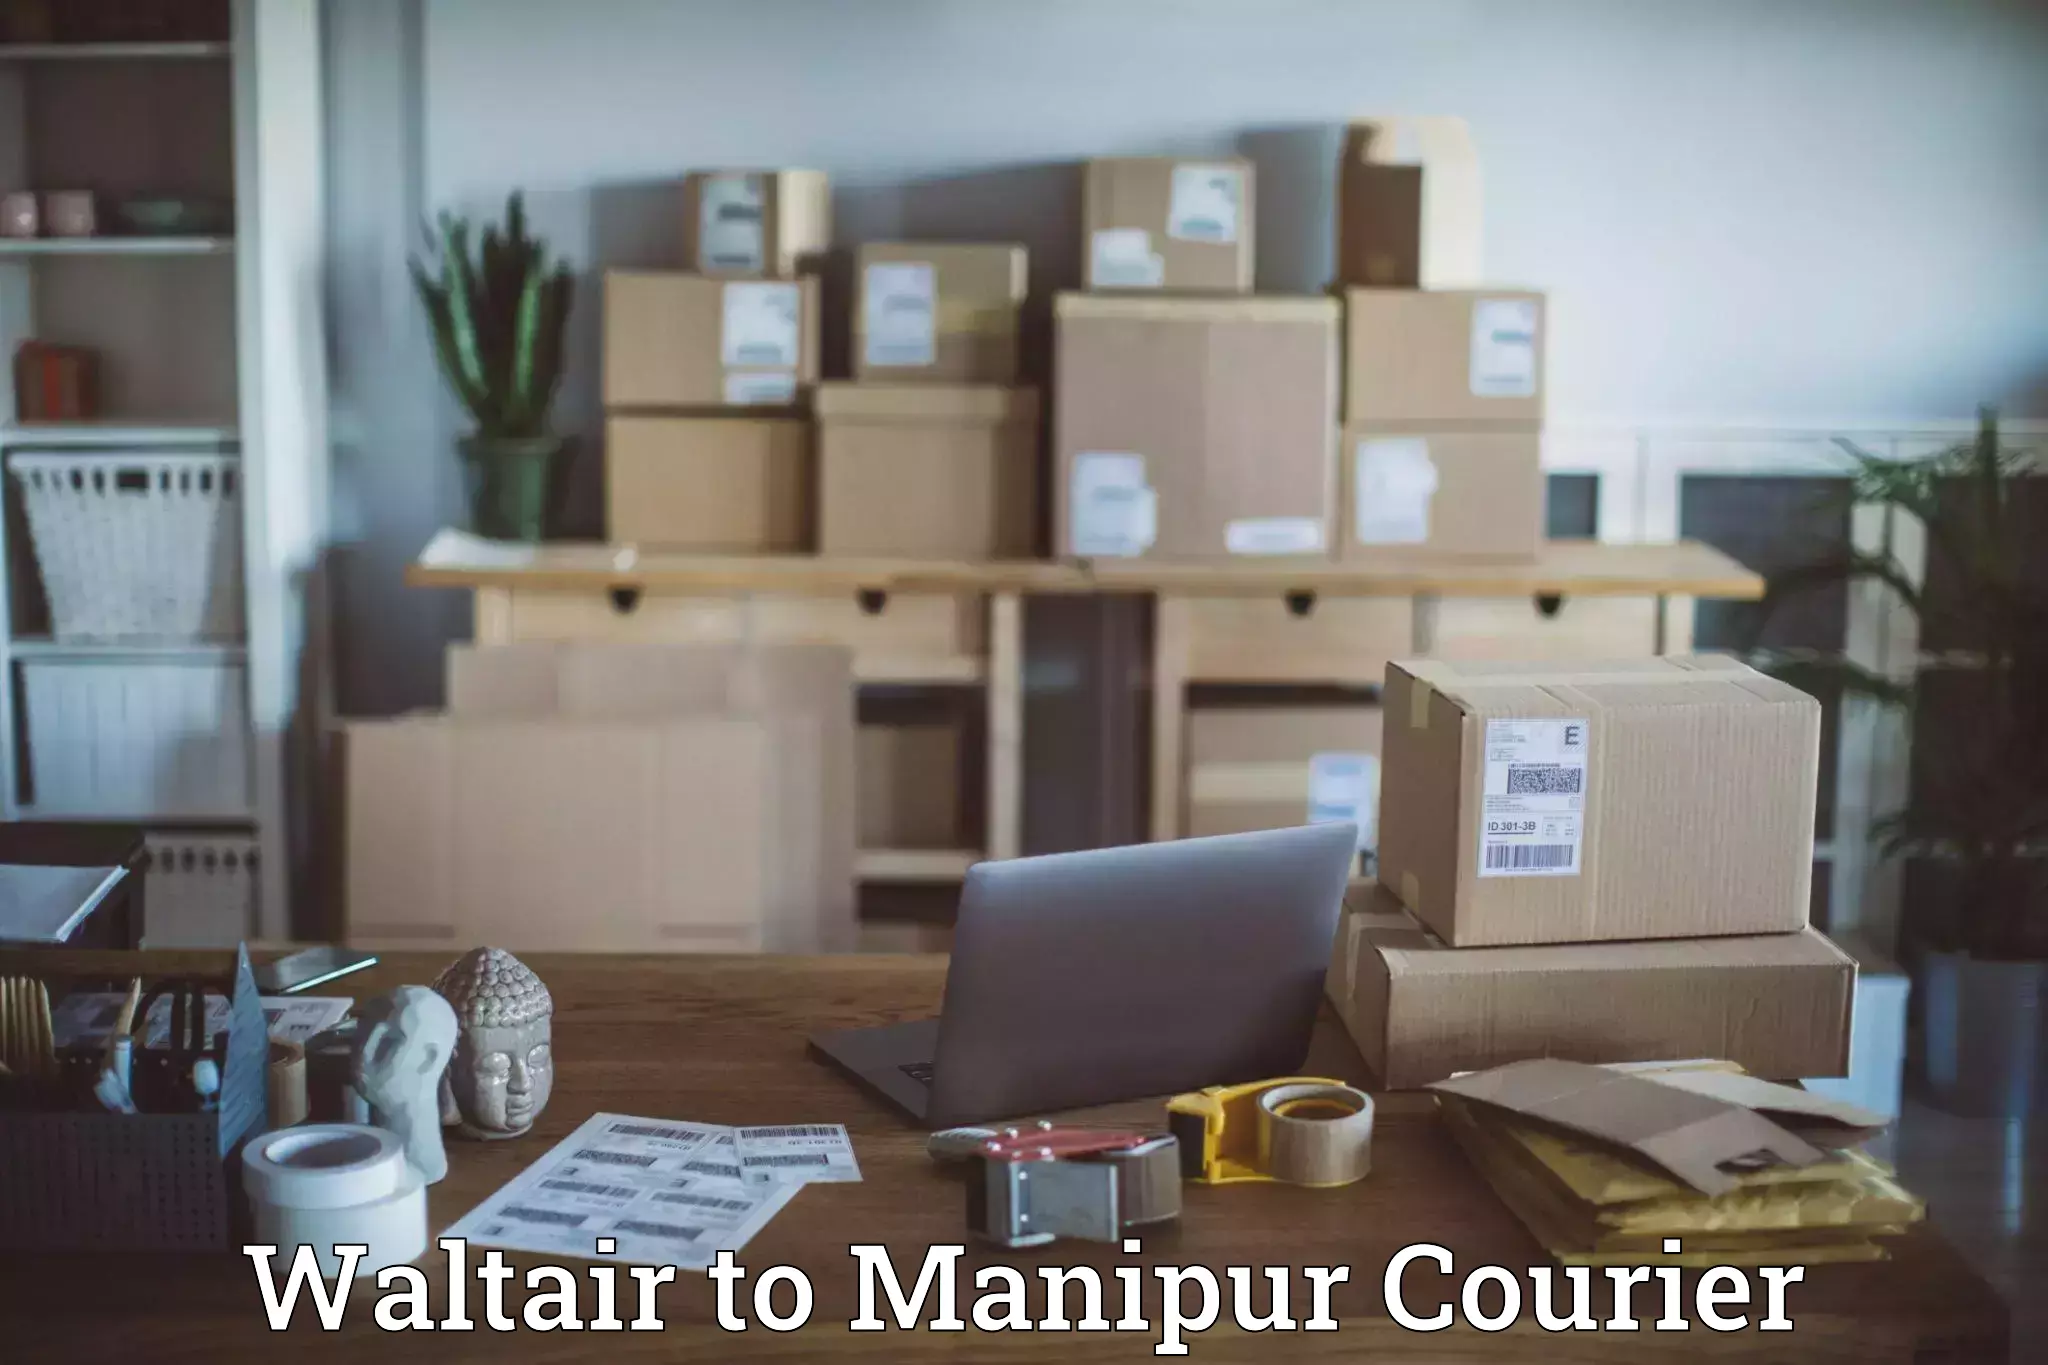 Doorstep delivery service Waltair to Manipur